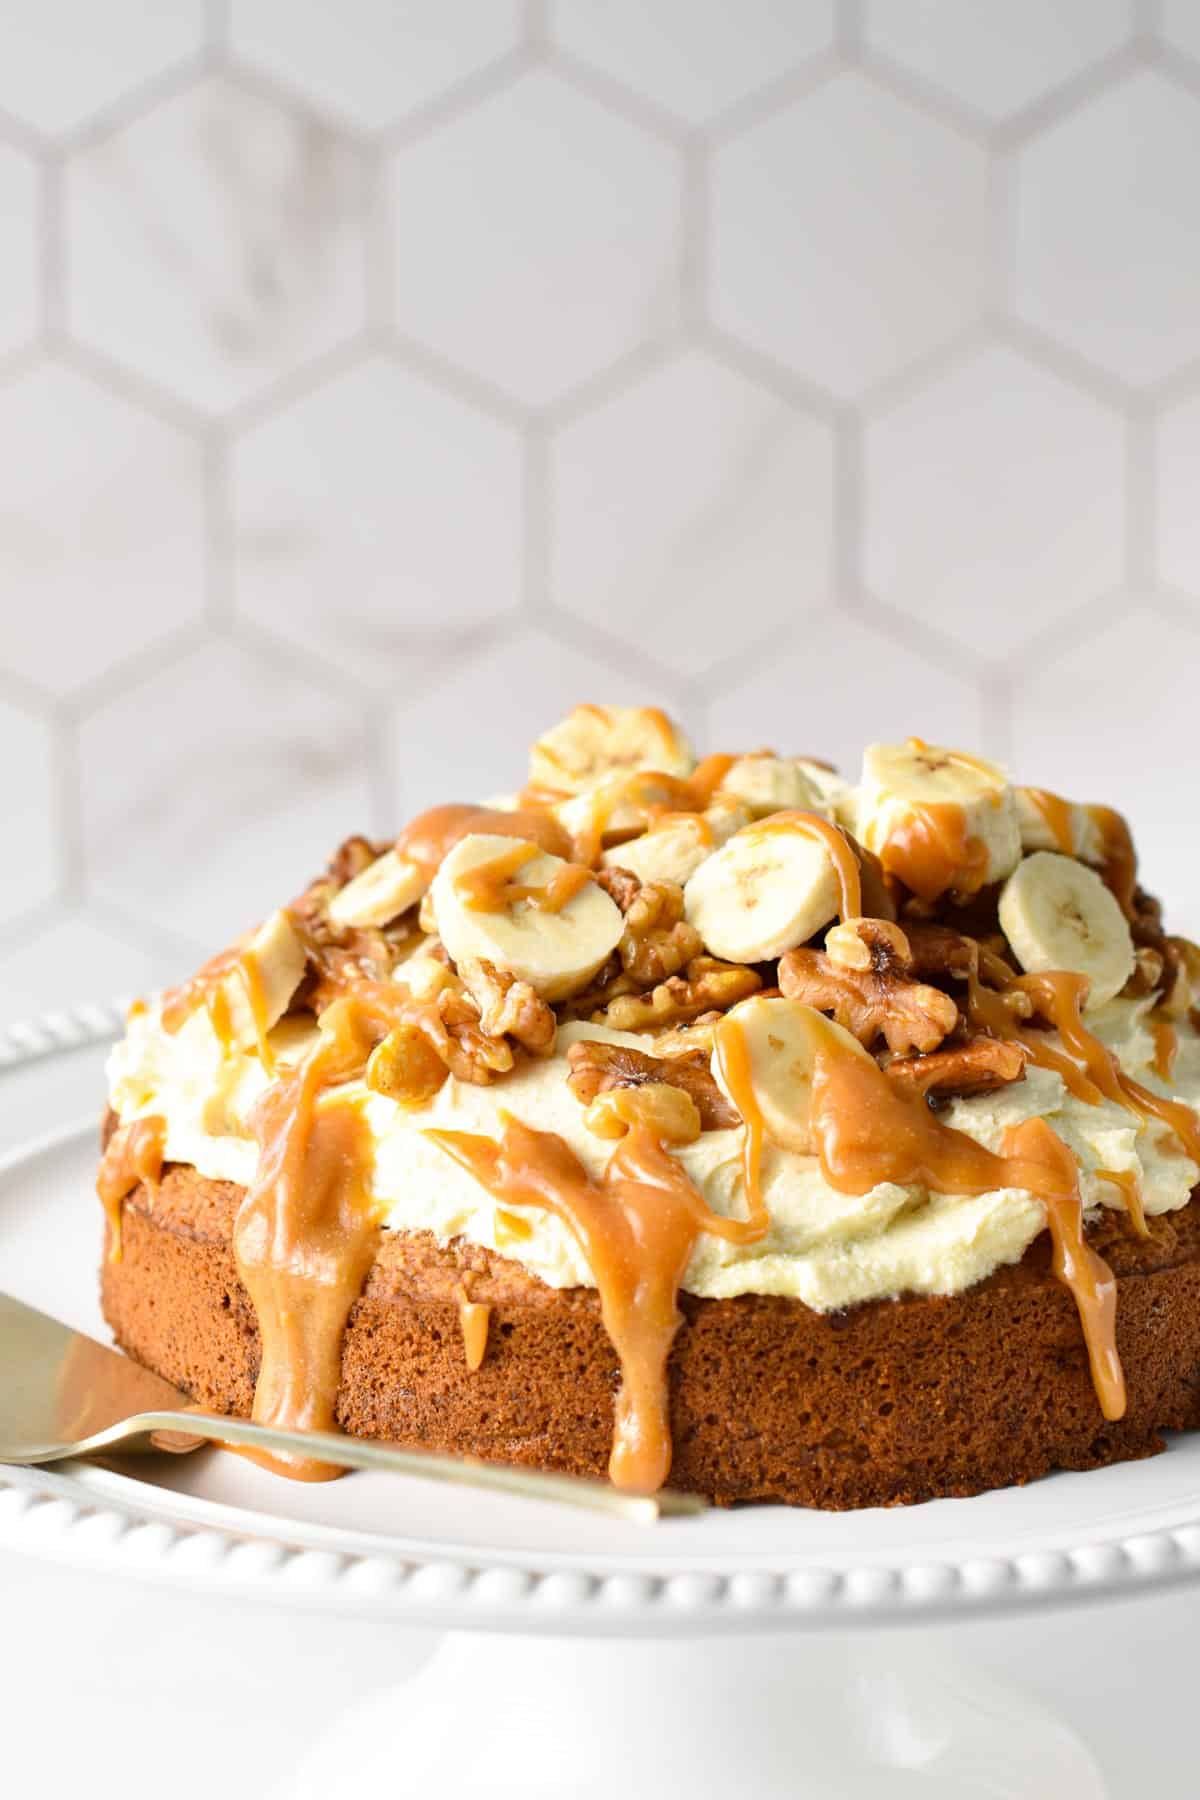 A single layer oat flour cake topped with dairy-free vanilla frosting, banana slices, walnuts, pecans, and peanut butter caramel.